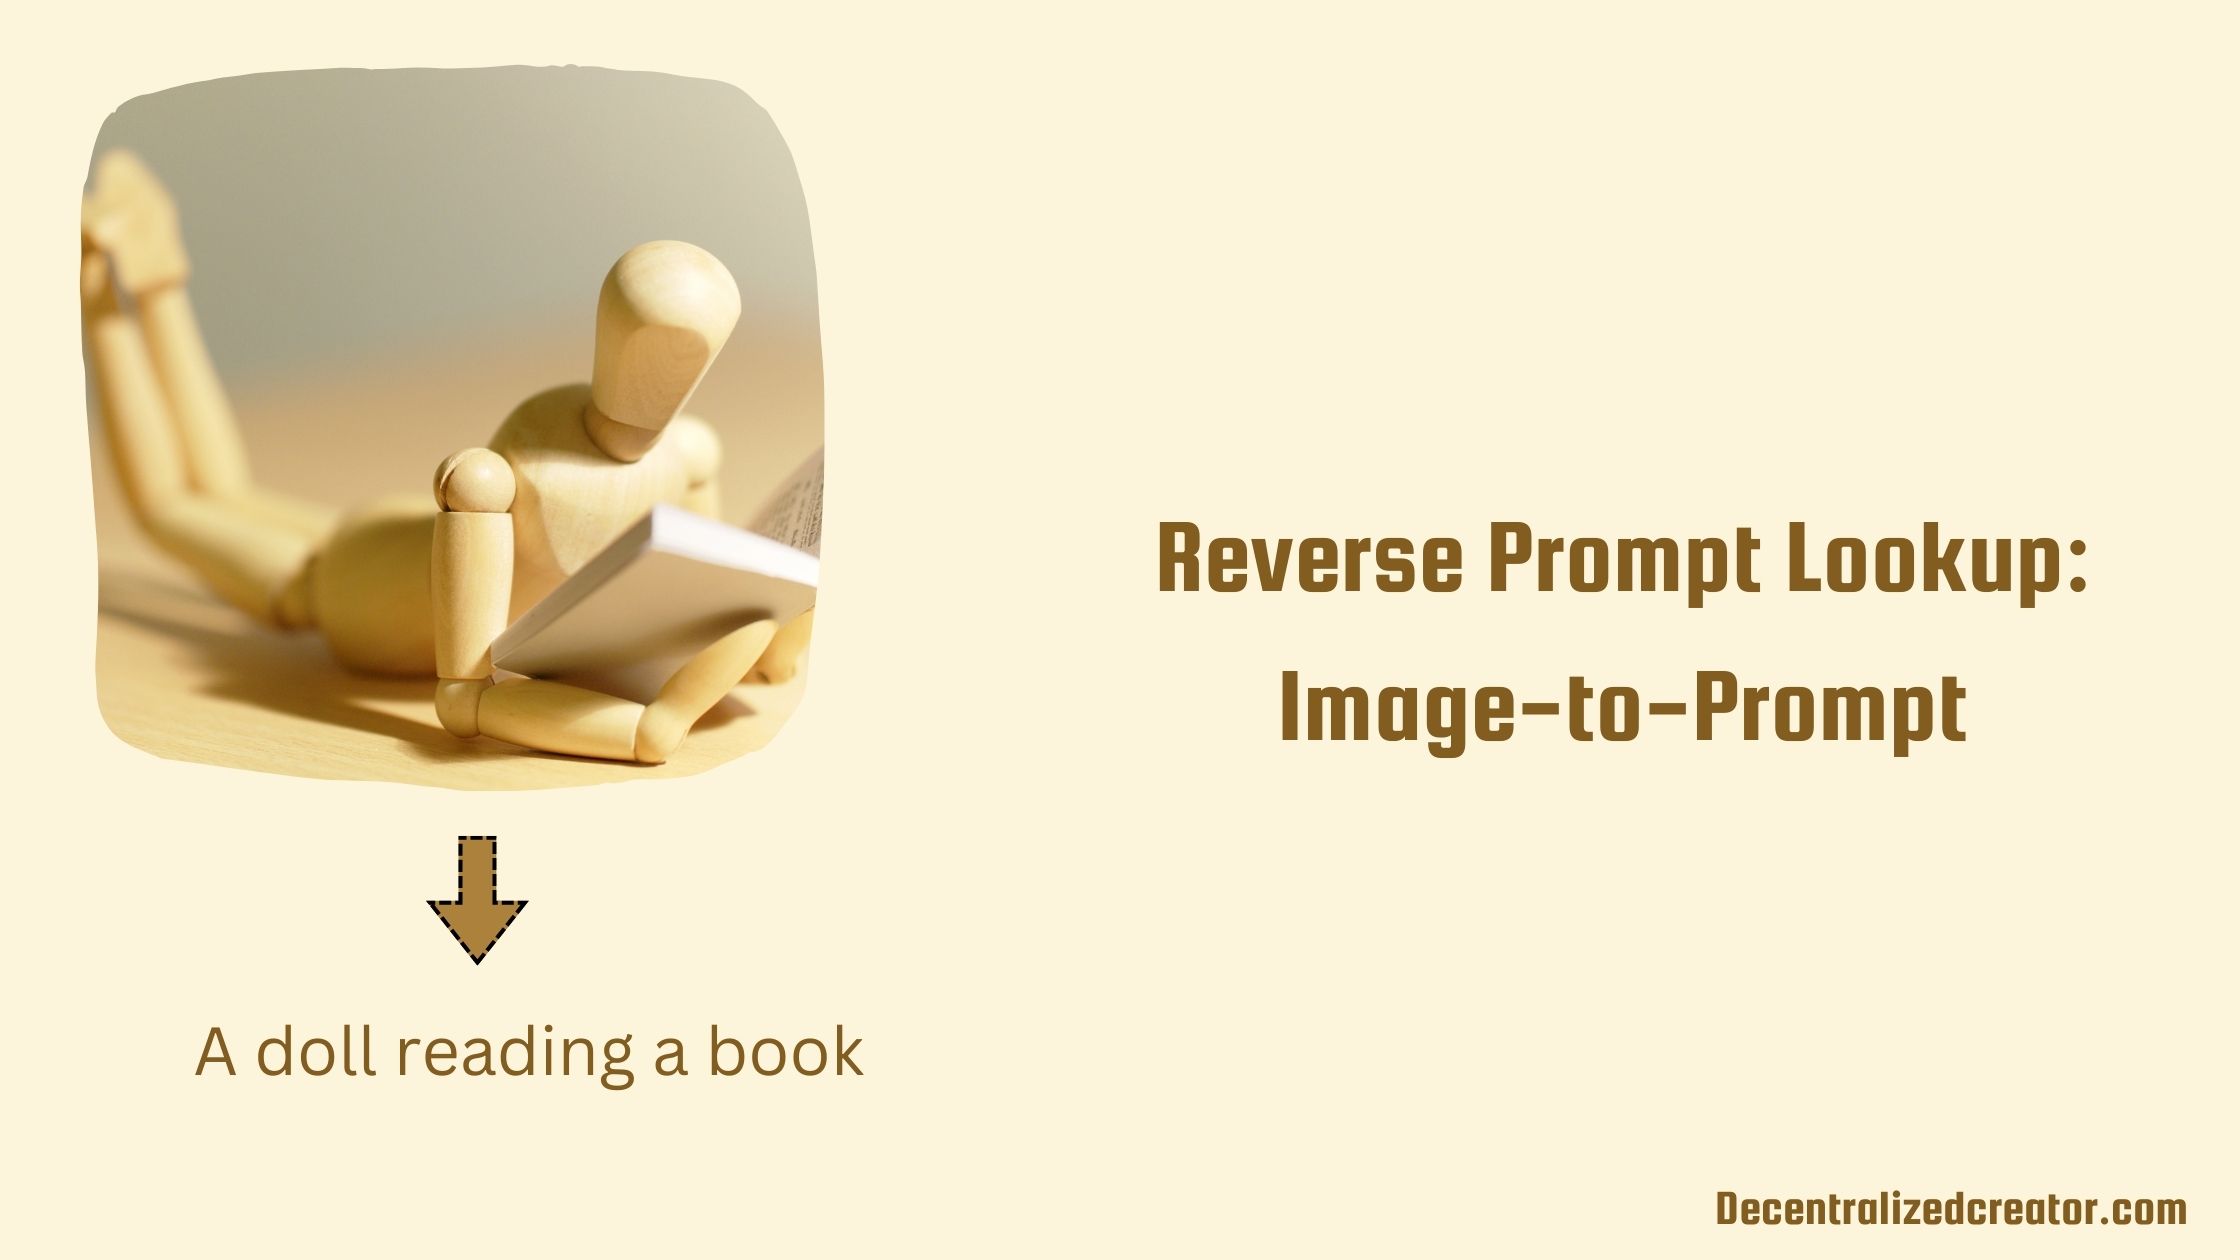 Reverse Prompt Lookup: Image-to-Prompt